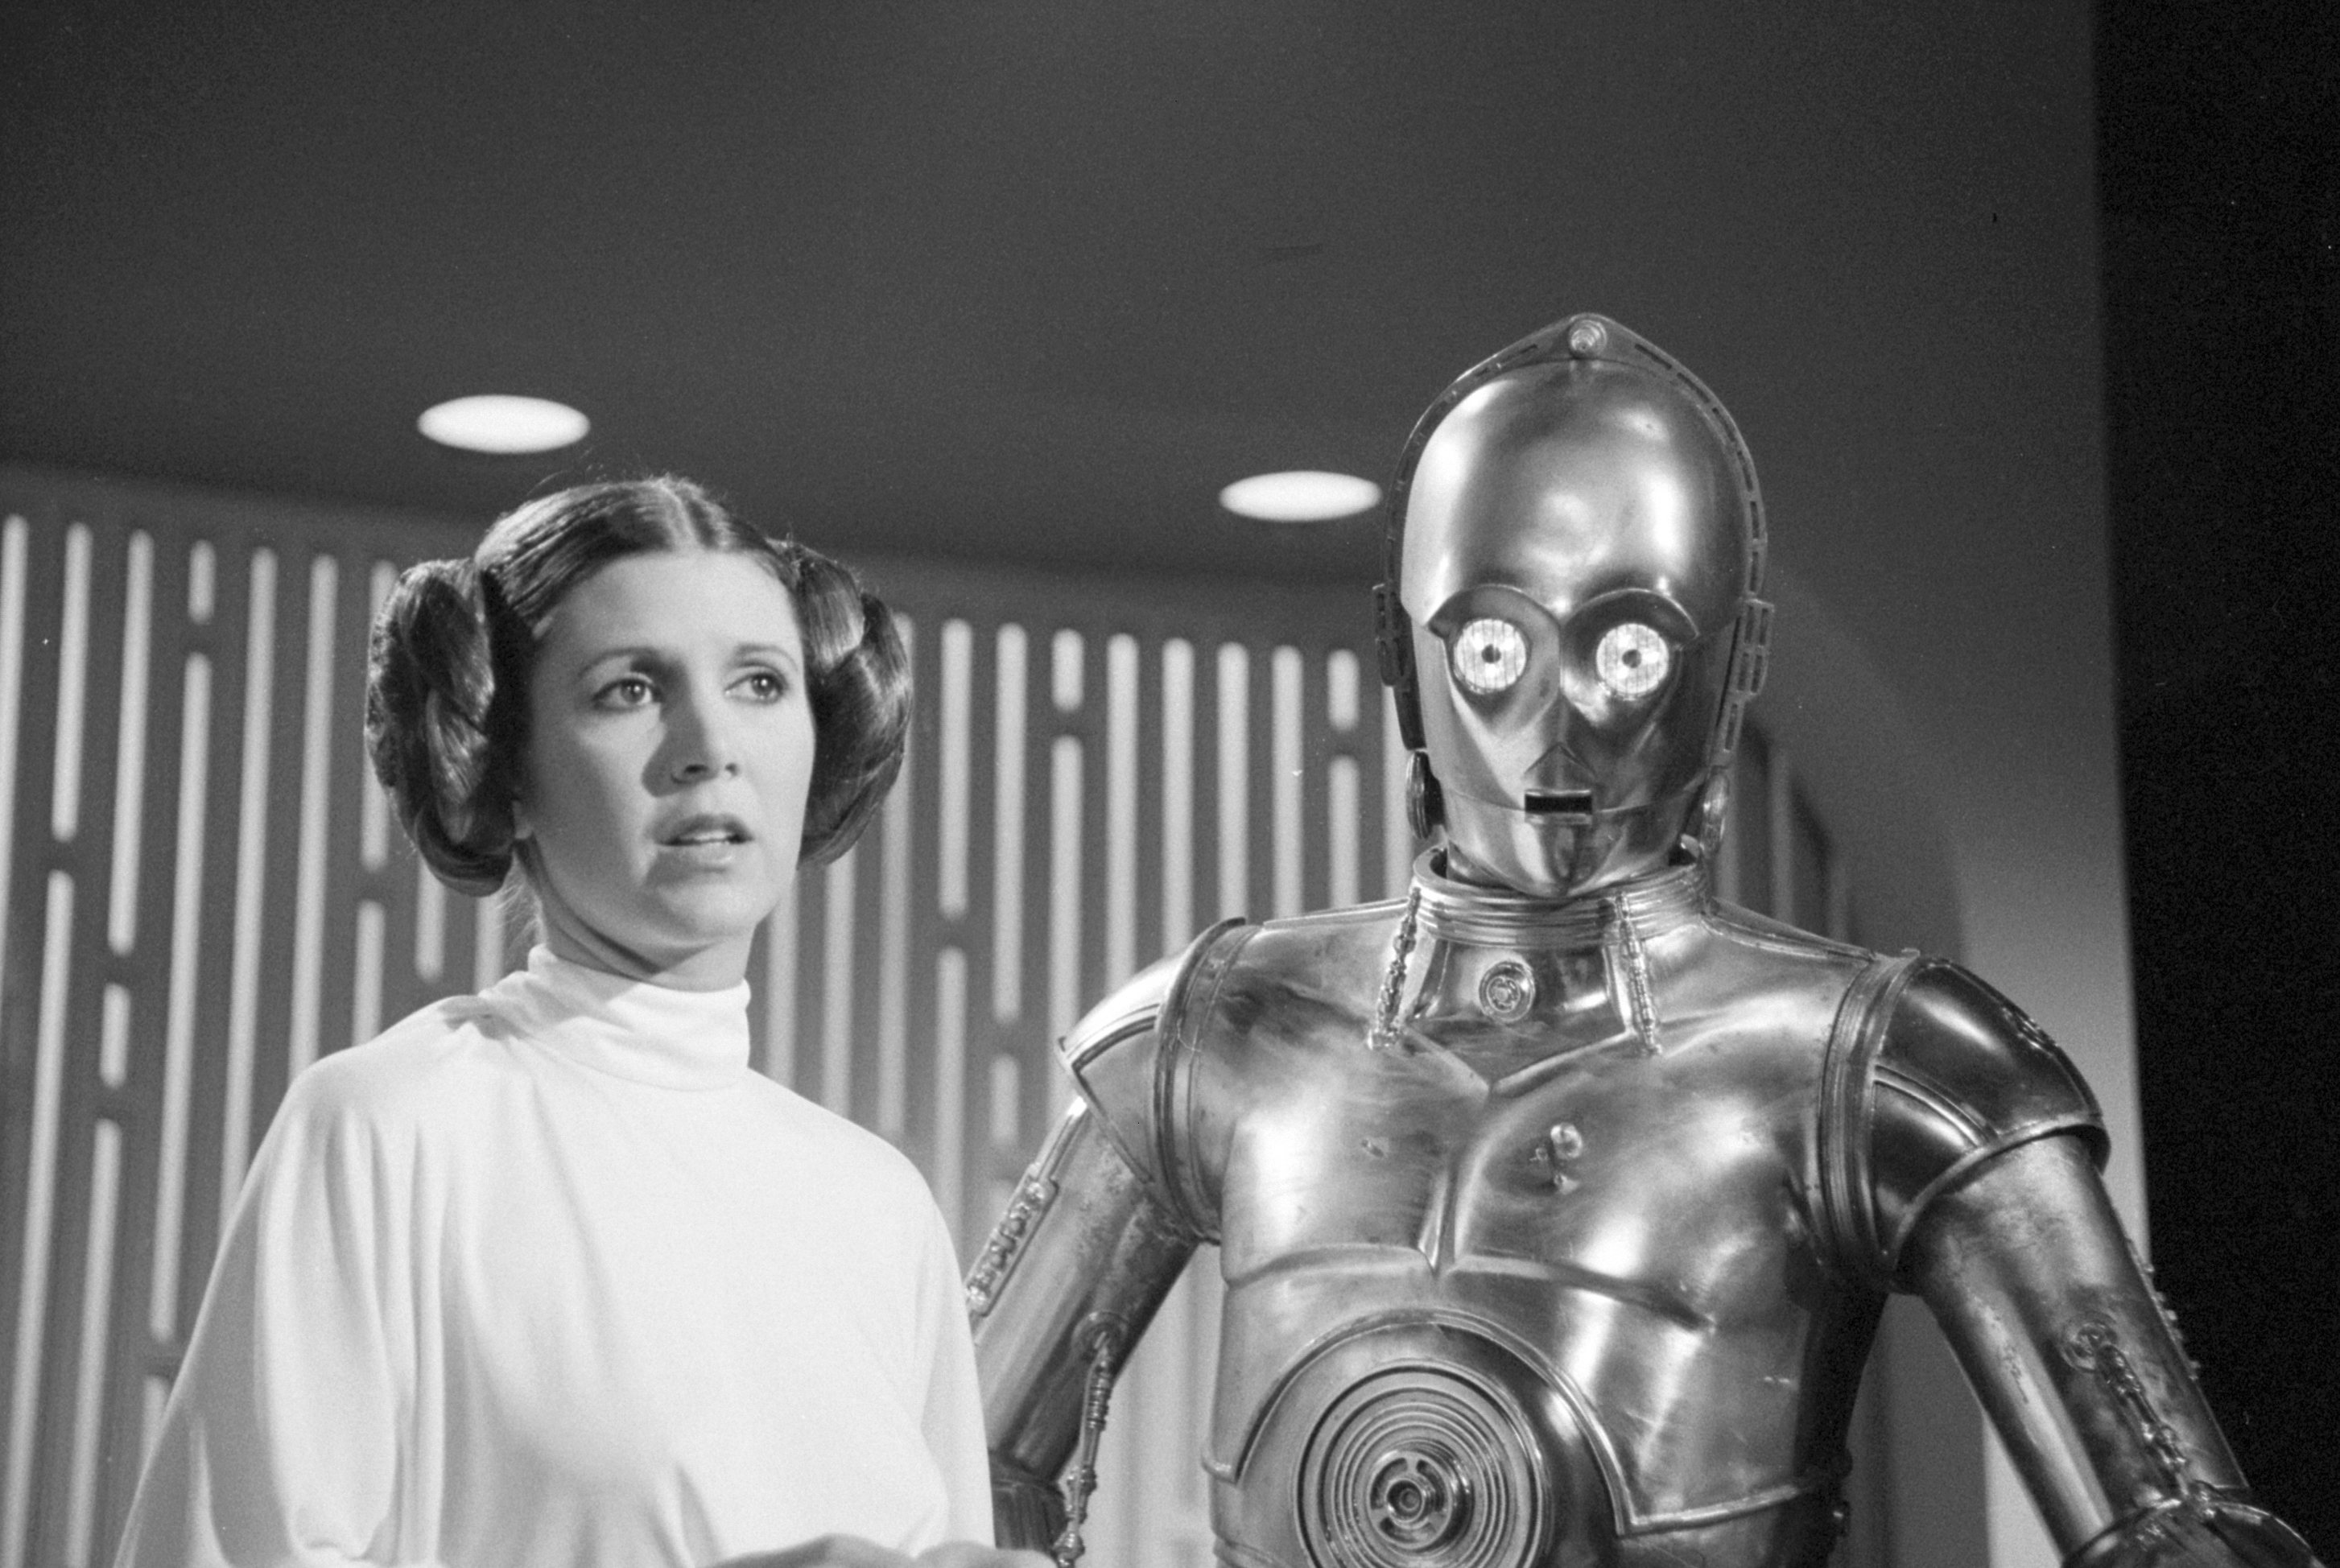 Carrie Fisher as Princess Leia with C-3PO in a scene from George Lucas' Star Wars saga